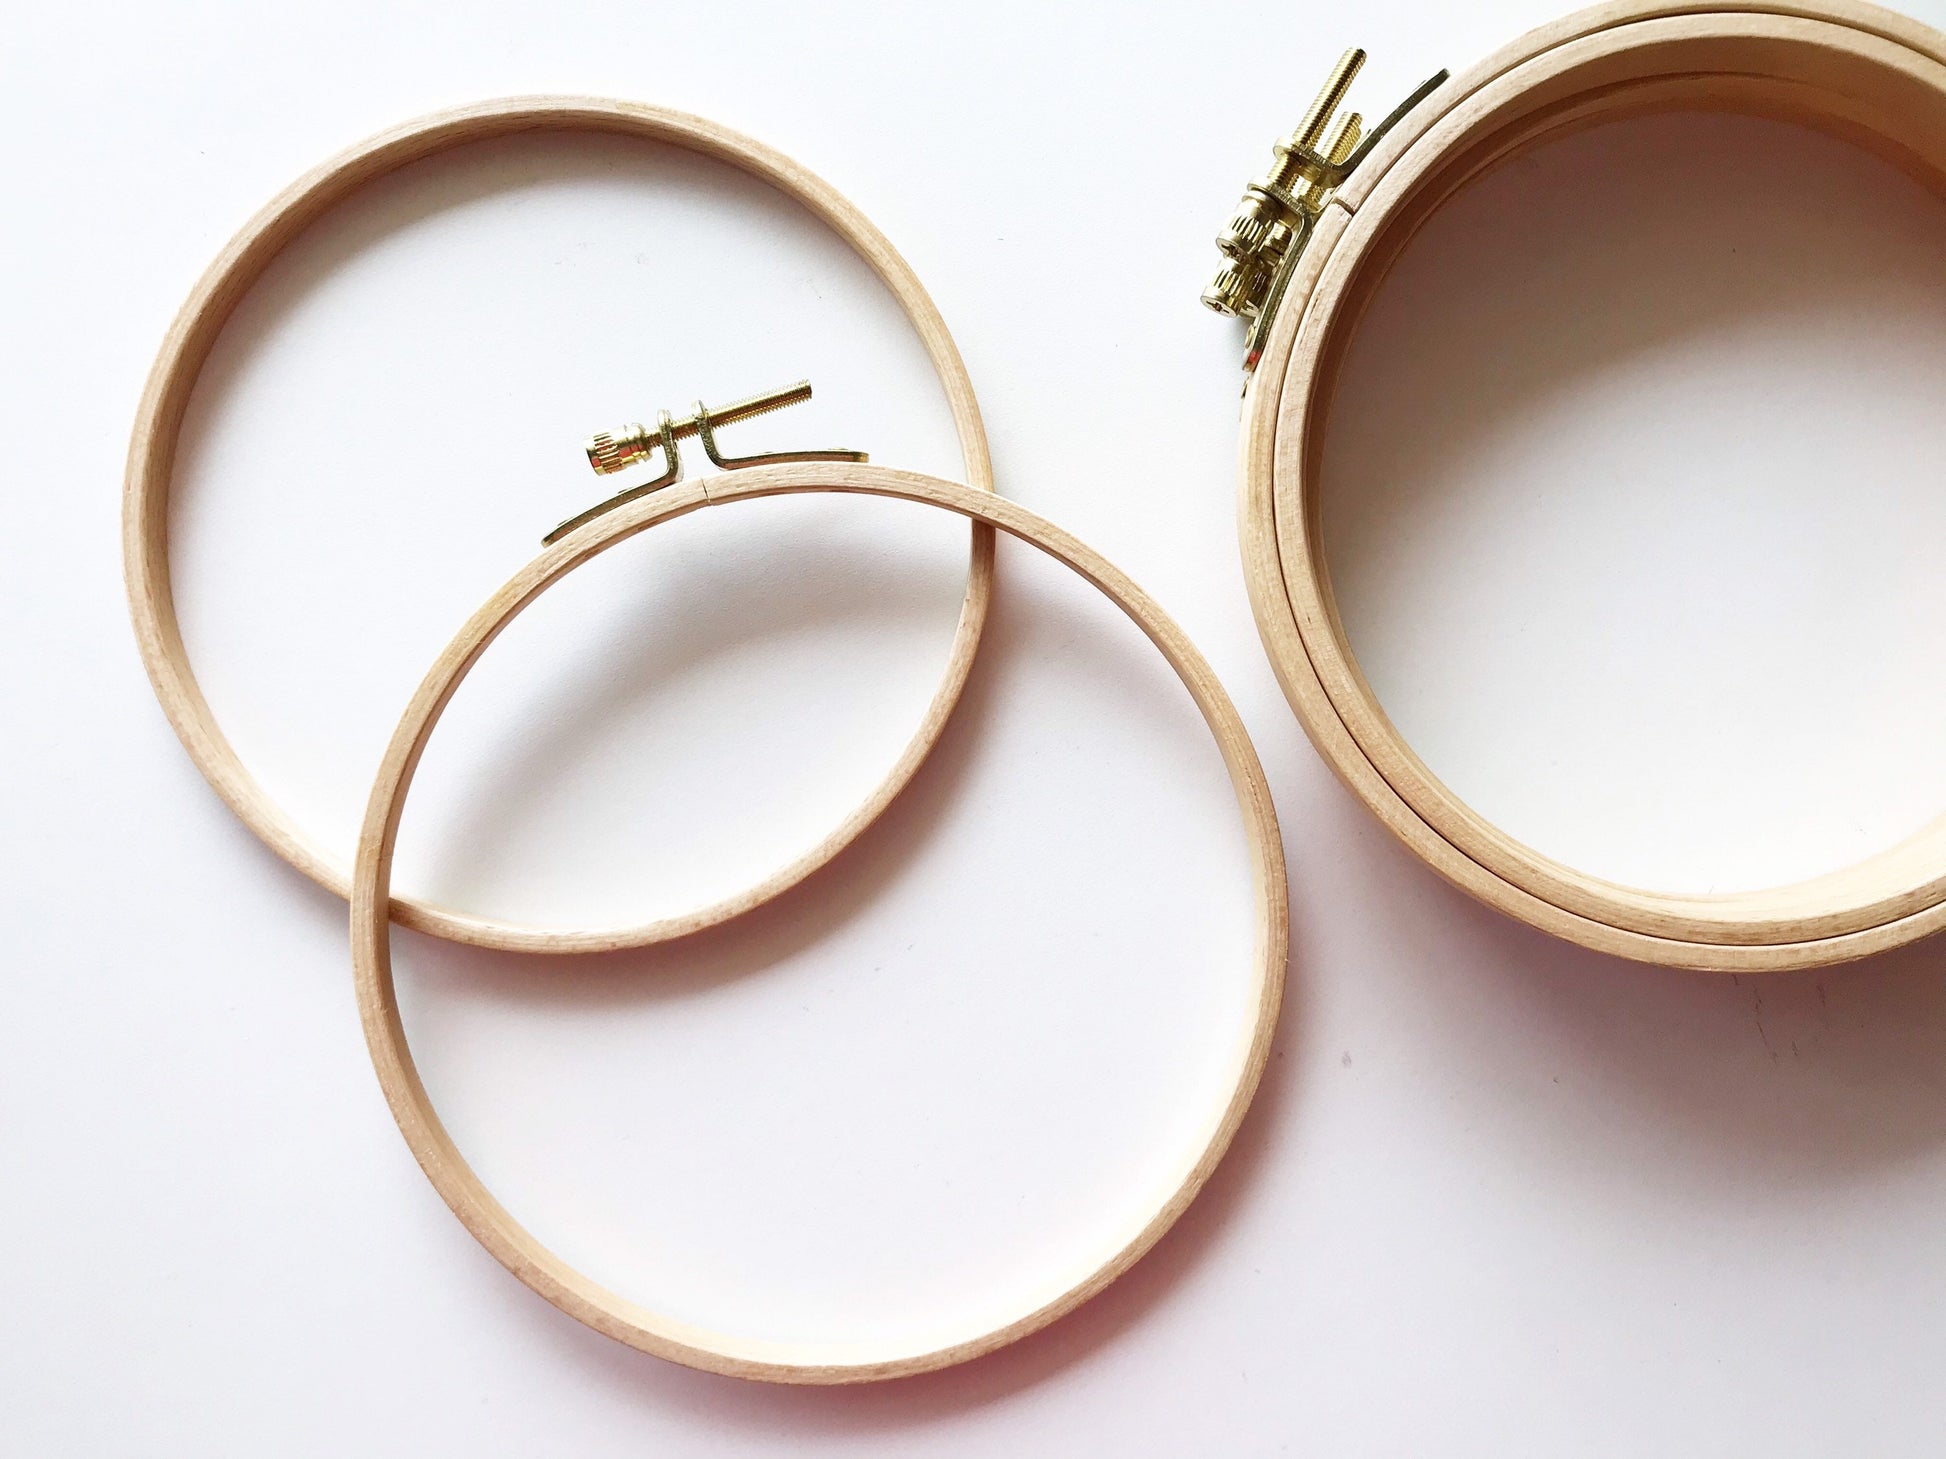 Vintage Wooden Embroidery Hoops Set Of 4 Made In Taiwan ROC 4 to 8